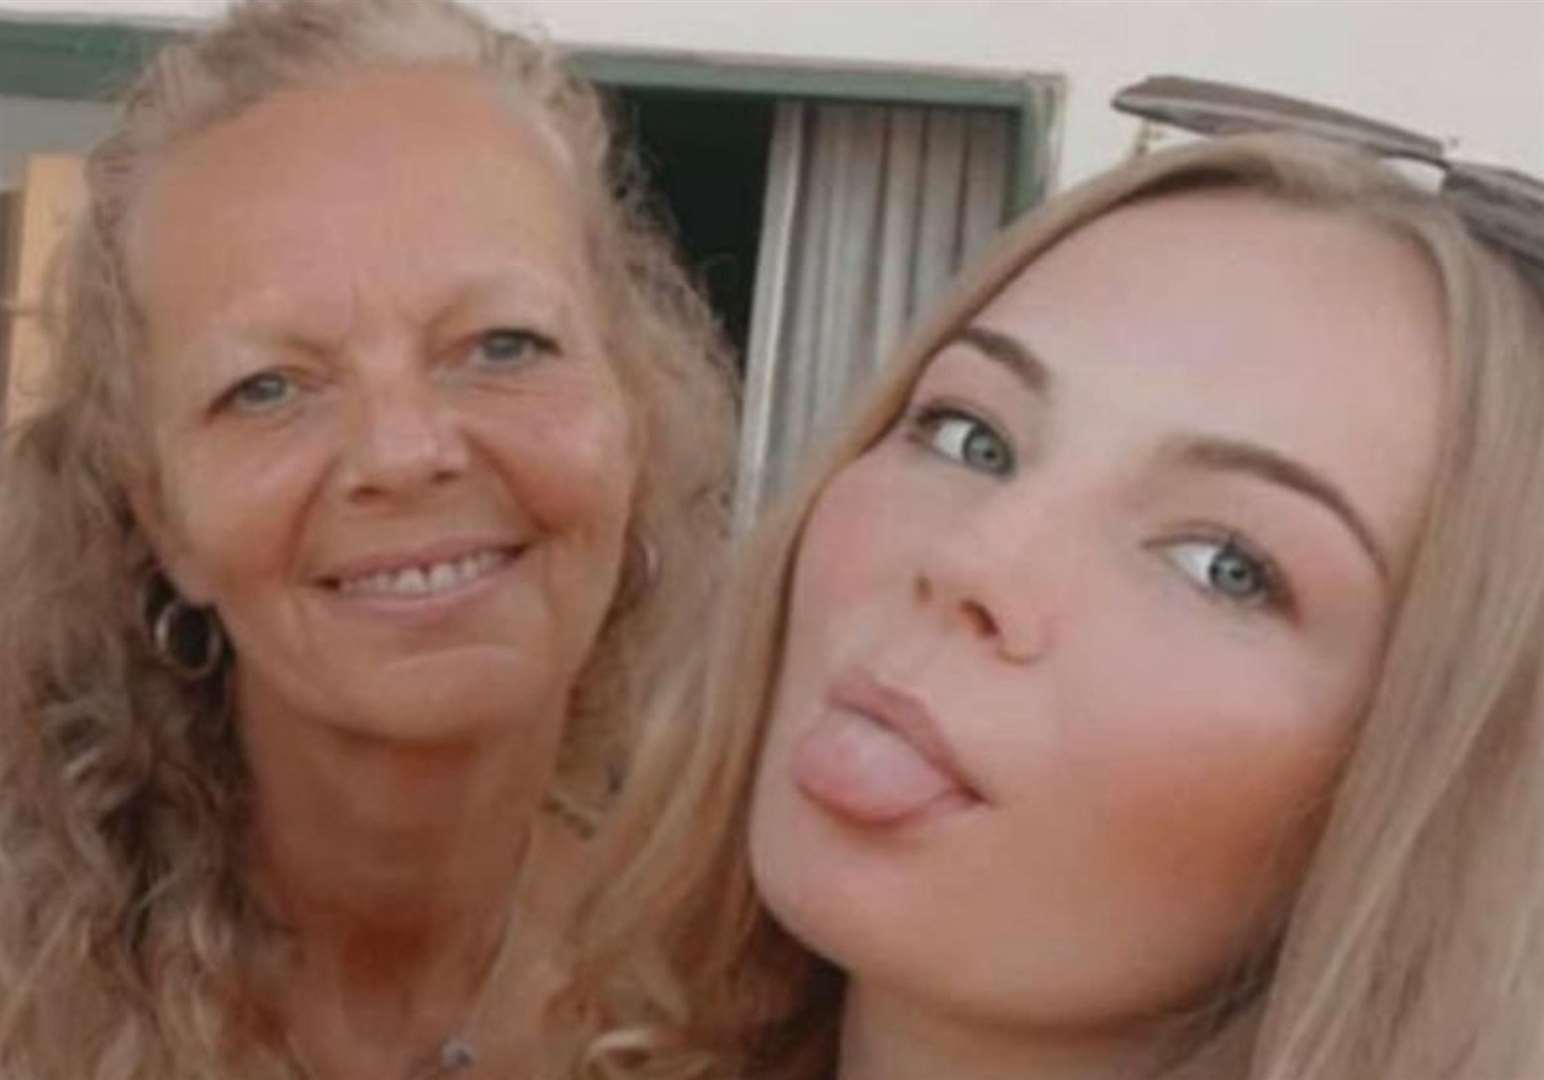 Leah Churchill and Brooke Wanstall are believed to have suffered carbon monoxide poisoning